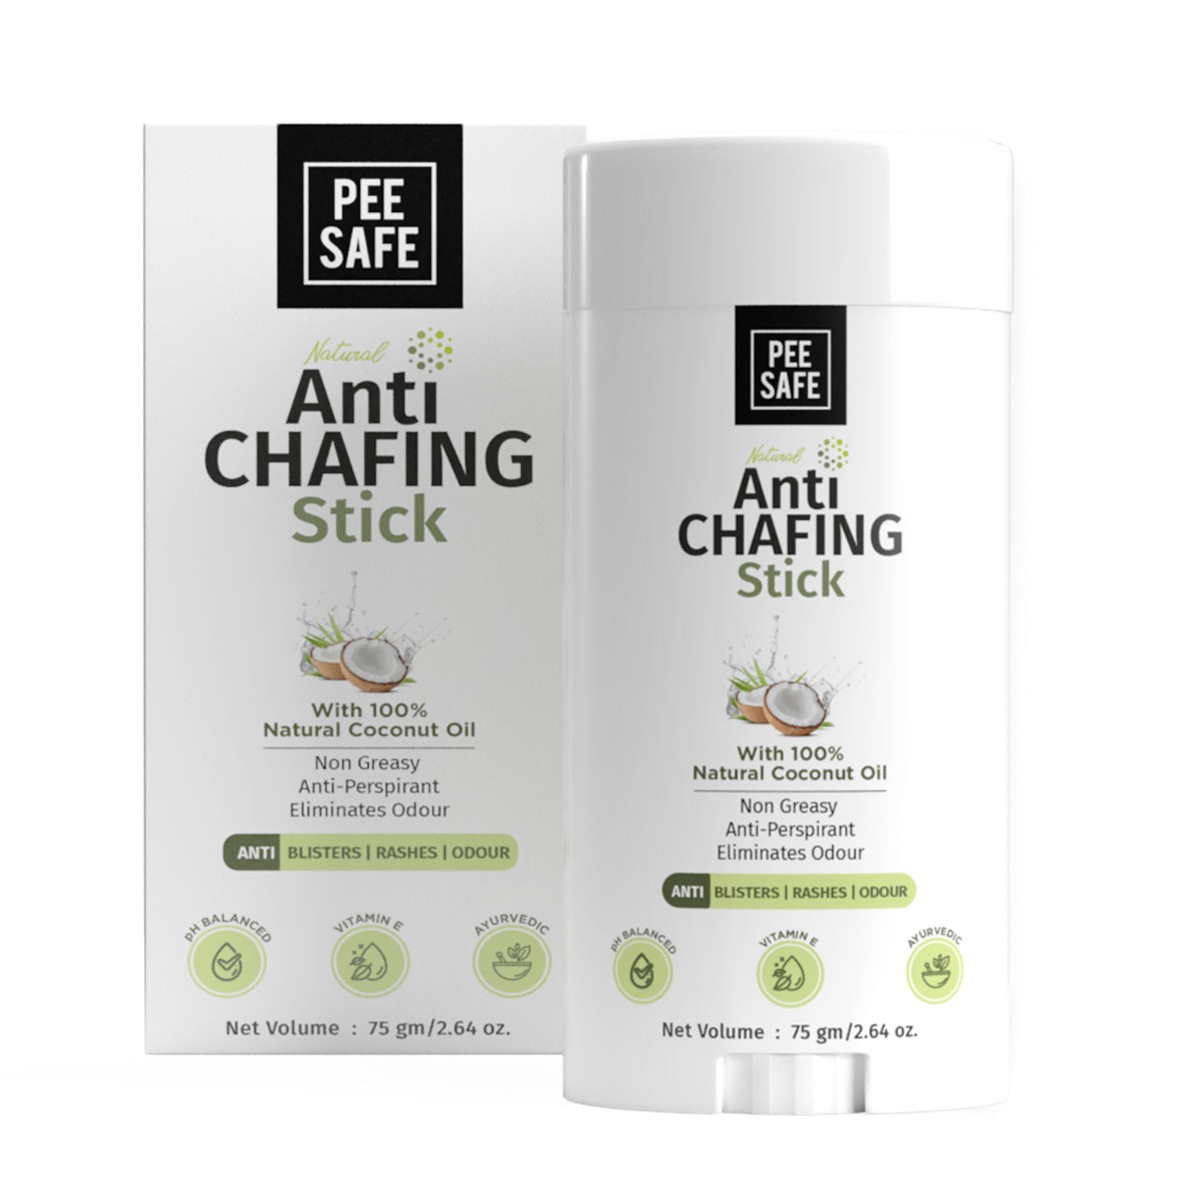 Pee Safe Anti Chafing Cream (For Blisters, Rashes and Odour), 75gm